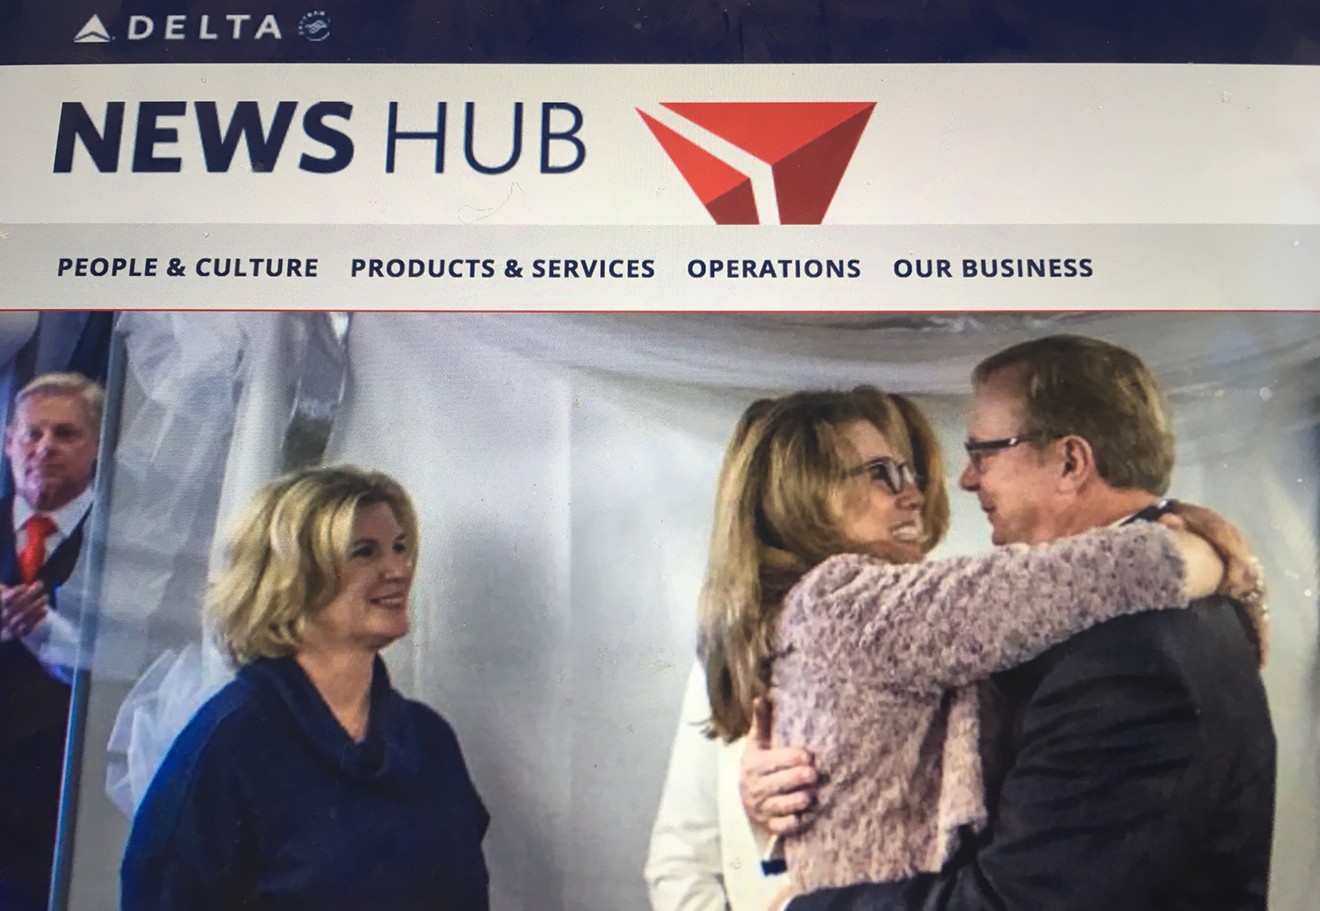 This couple tied the knot in midair as Delta retired its last 747 aircraft.